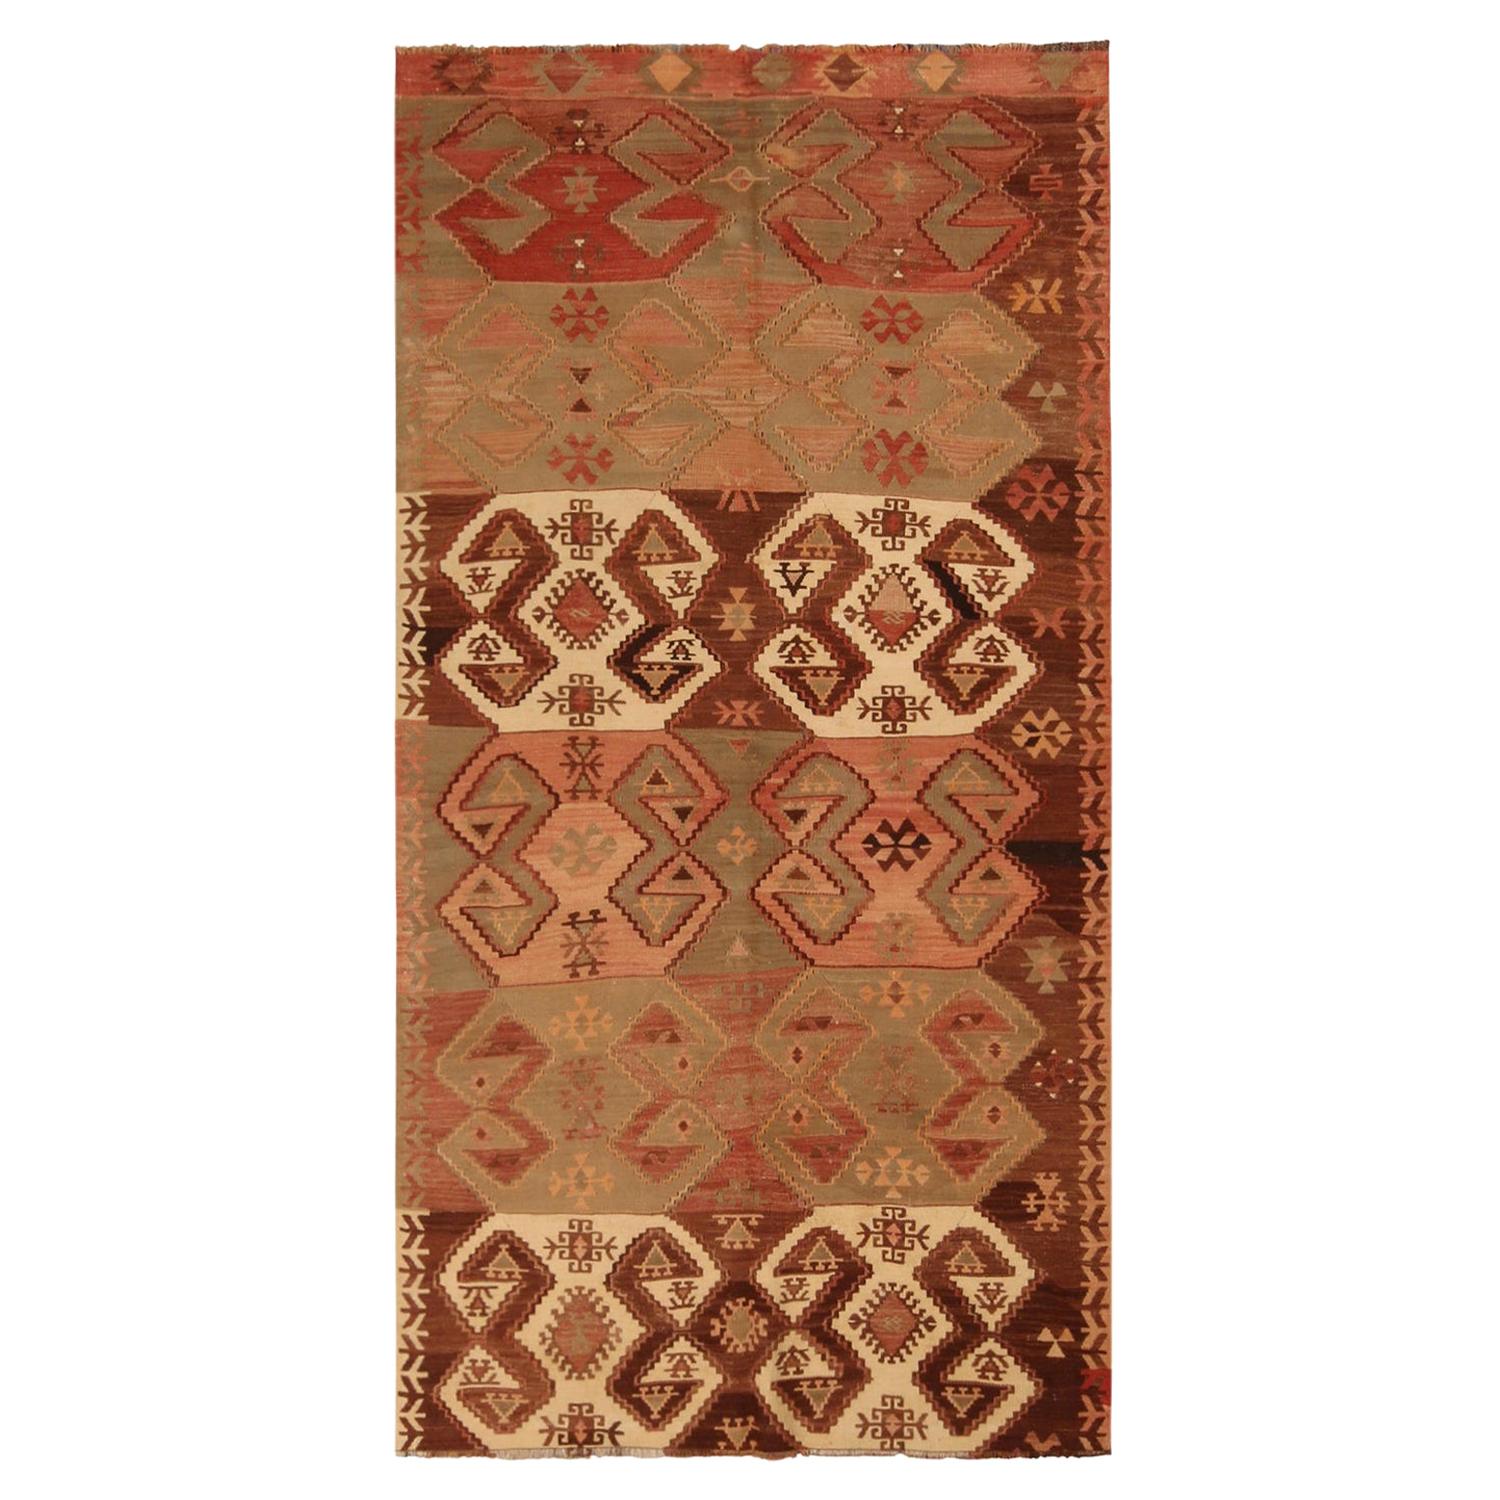 Vintage Emirdag Red and Brown Wool Kilim Rug with White Accents by Rug & Kilim For Sale